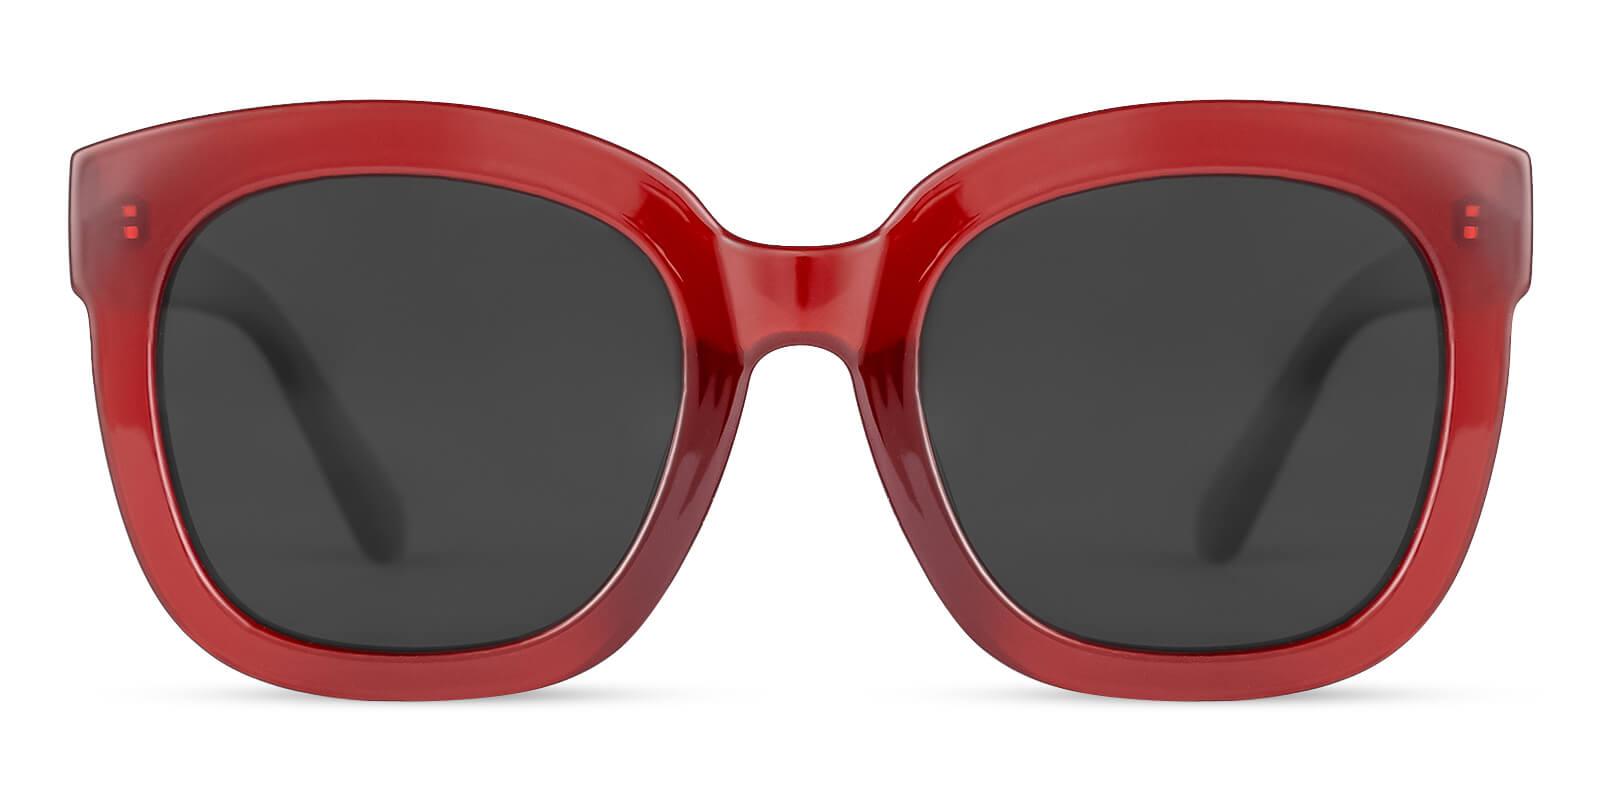 Kudos Red Plastic Fashion , Sunglasses Frames from ABBE Glasses